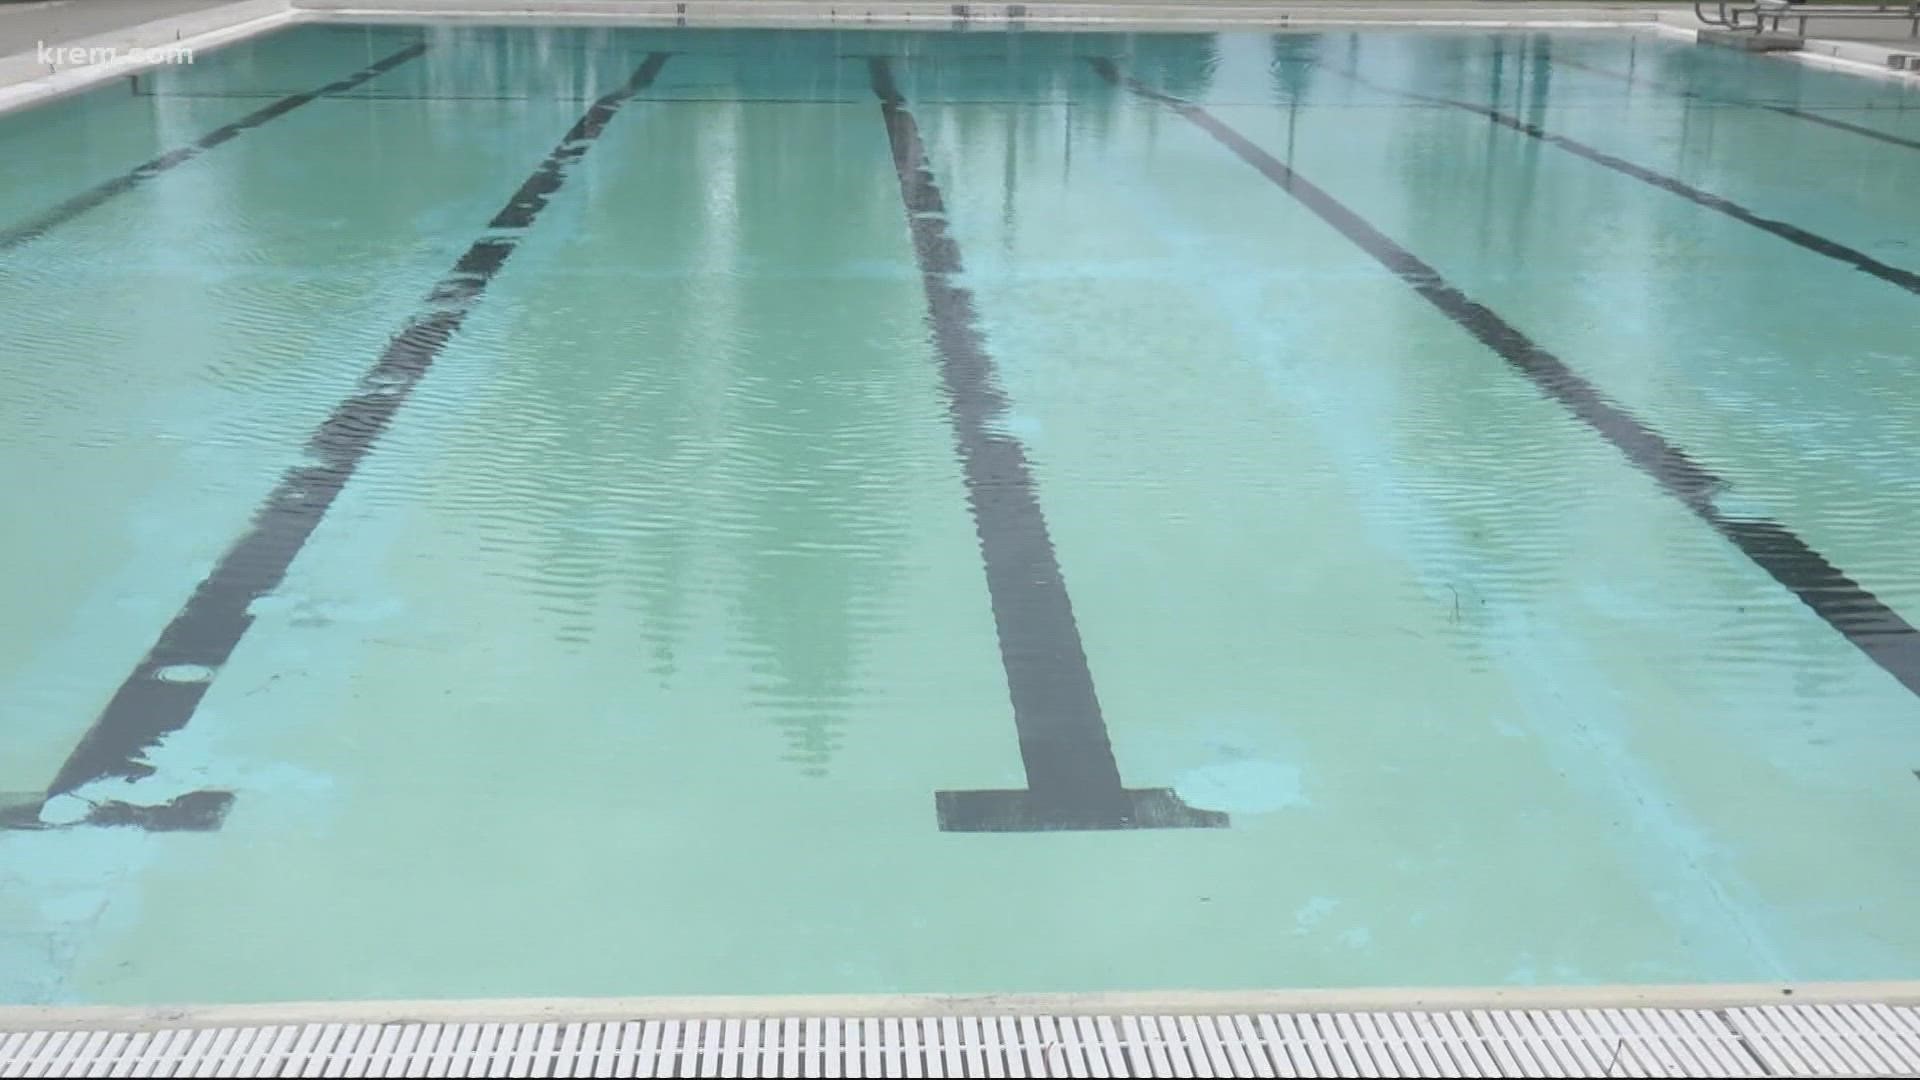 The city's three pools are set to open on June 18. However, that may not happen unless the YMCA hires more lifeguards.